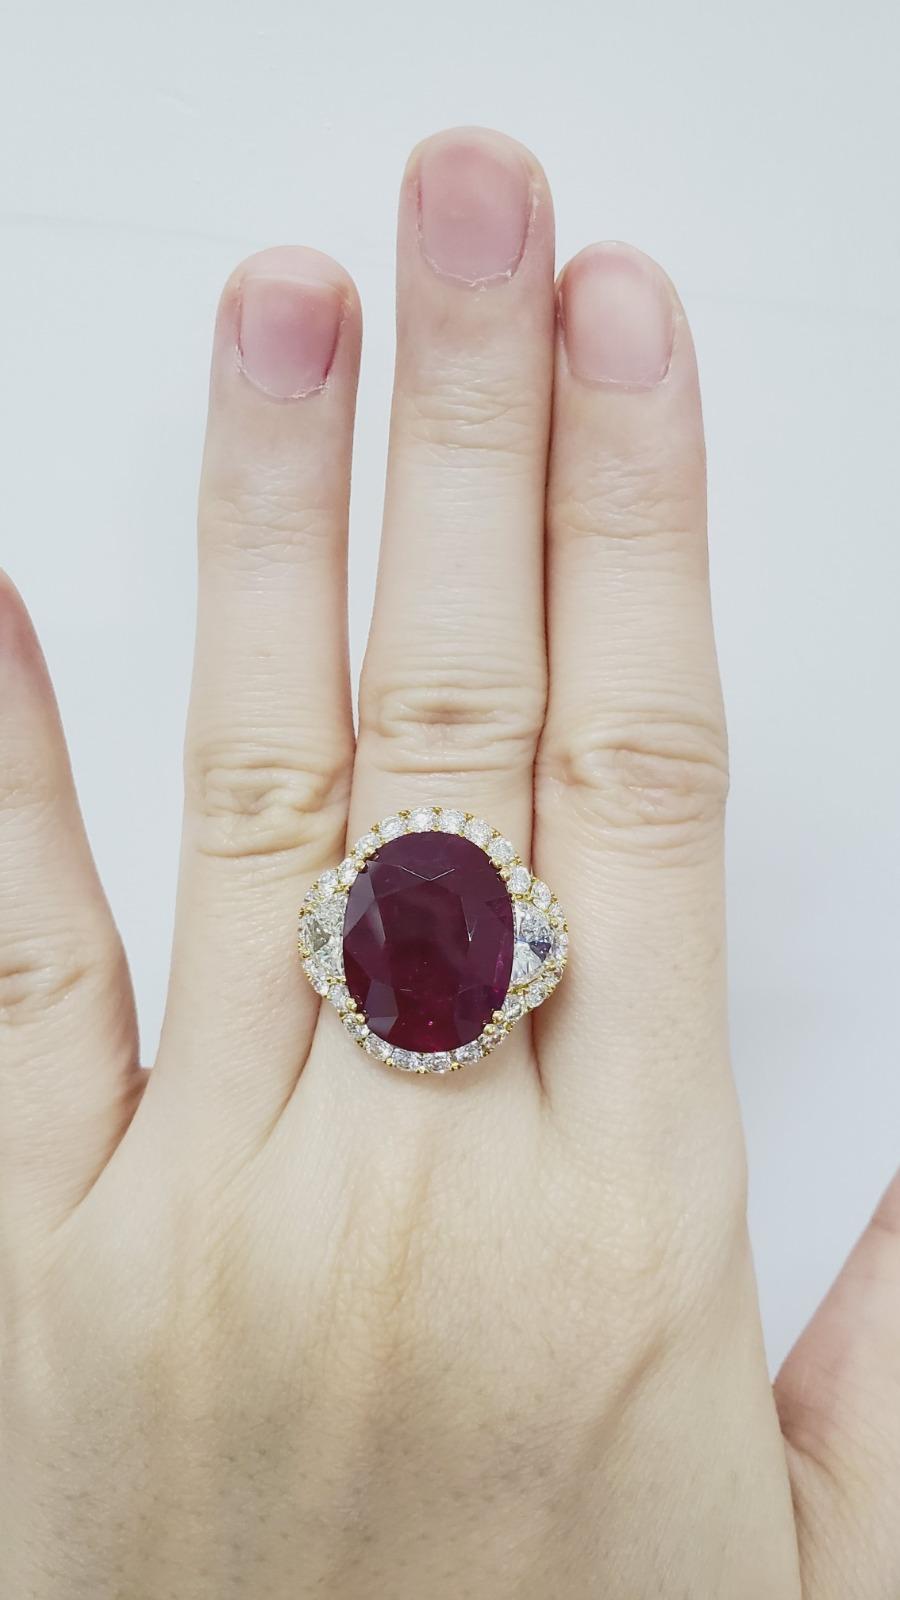 Primary Stone: Red Ruby (Mozambique) 
Shape : Oval Cut
Ruby Weight: 12.52 Carats 
Measurements Ruby : 17.32 x 13.55 x 6.18mm
Color: Red Ruby 
Accent Stones: Genuine Diamond
Shape Or Cut Diamond:
Average Color/clarity Diamond: F/G VS
Composition: